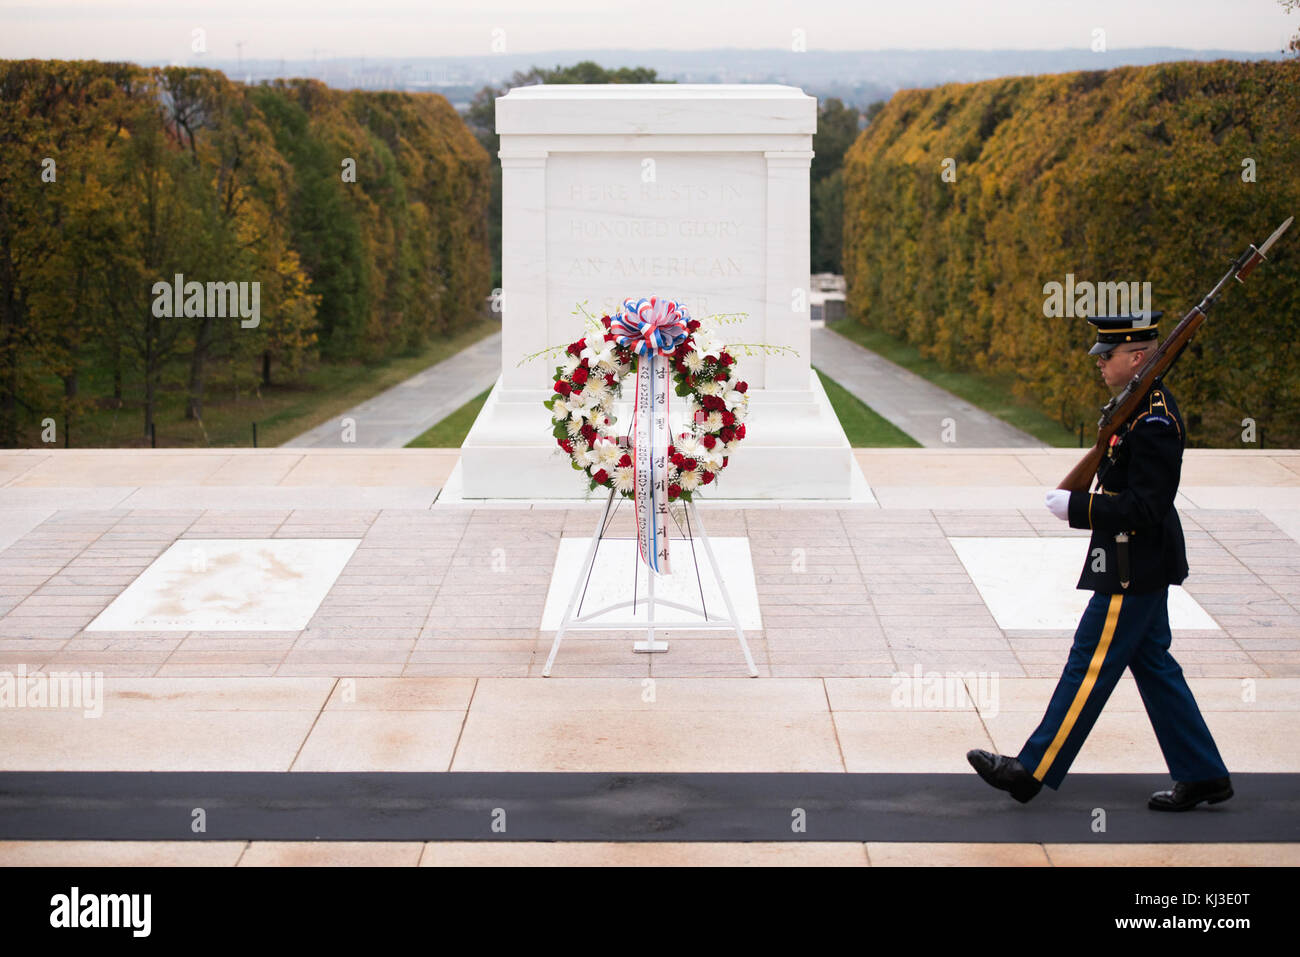 Gyeonggi Province Governor laid a wreath at the Tomb of the Unknown Soldier in Arlington National Cemetery (22507304372) Stock Photo